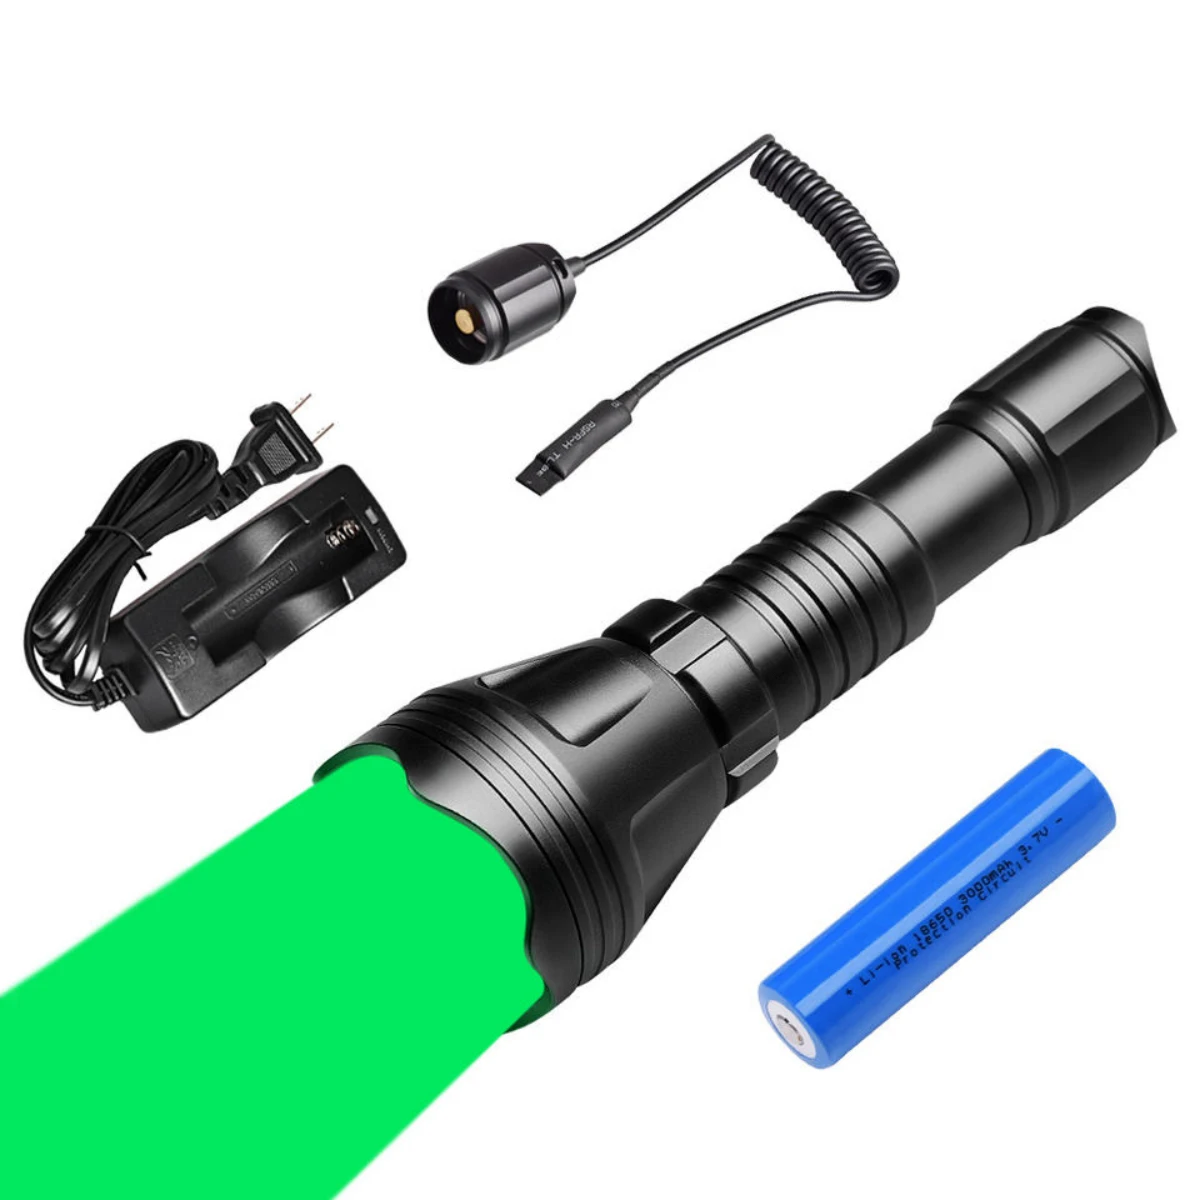 

Odepro KL52 Green Light Professional Hunting Flashlight Lamp Rechargeable LED Tactical Flashlights Powerful Zoomable Hunt Torch